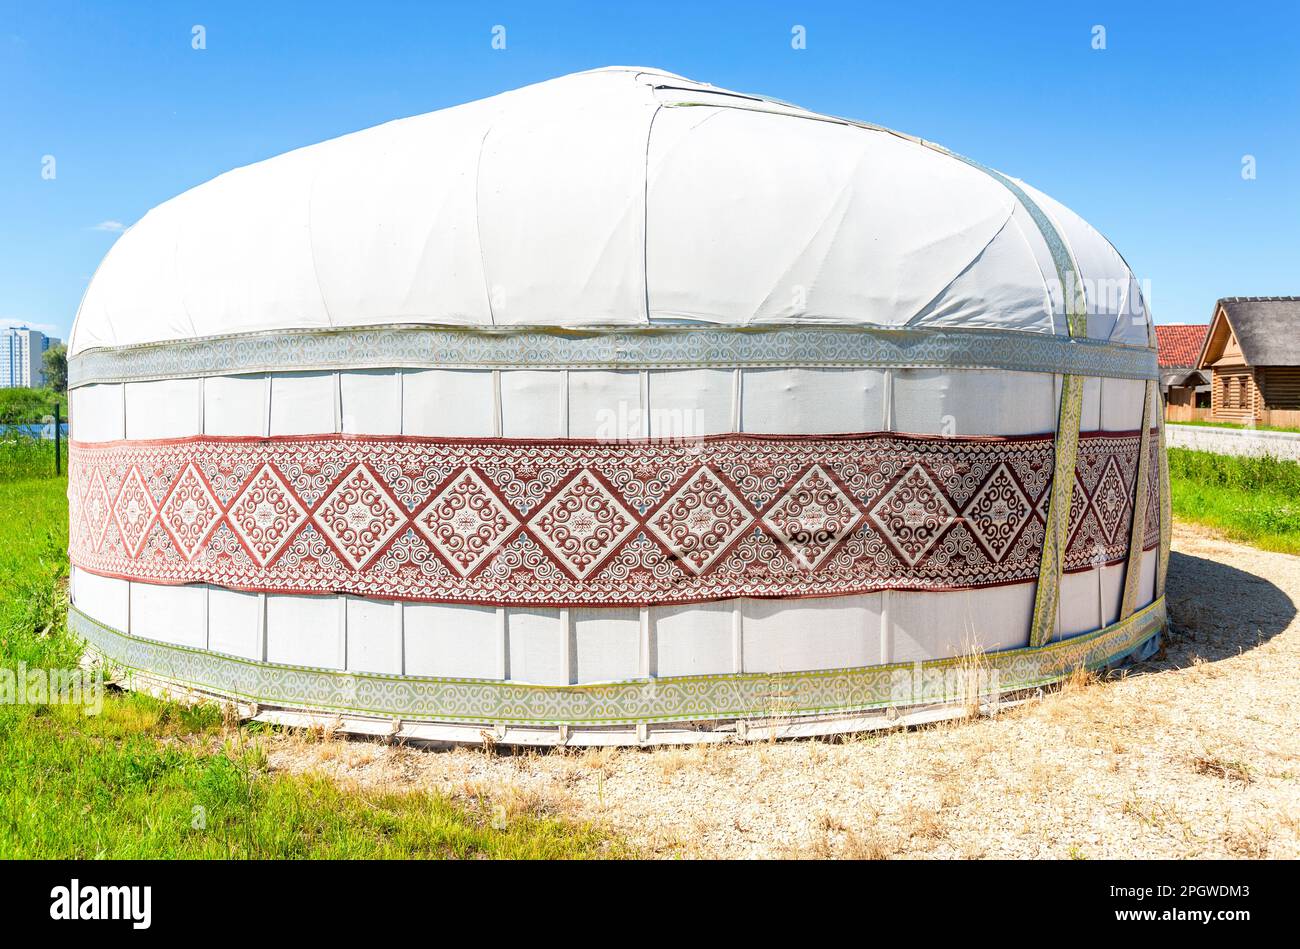 Samara, Russia - September 25, 2021: Yurt - national ancient house of the nomad peoples of Asian countries. Traditional Kazakh yurt in summer. Dwellin Stock Photo